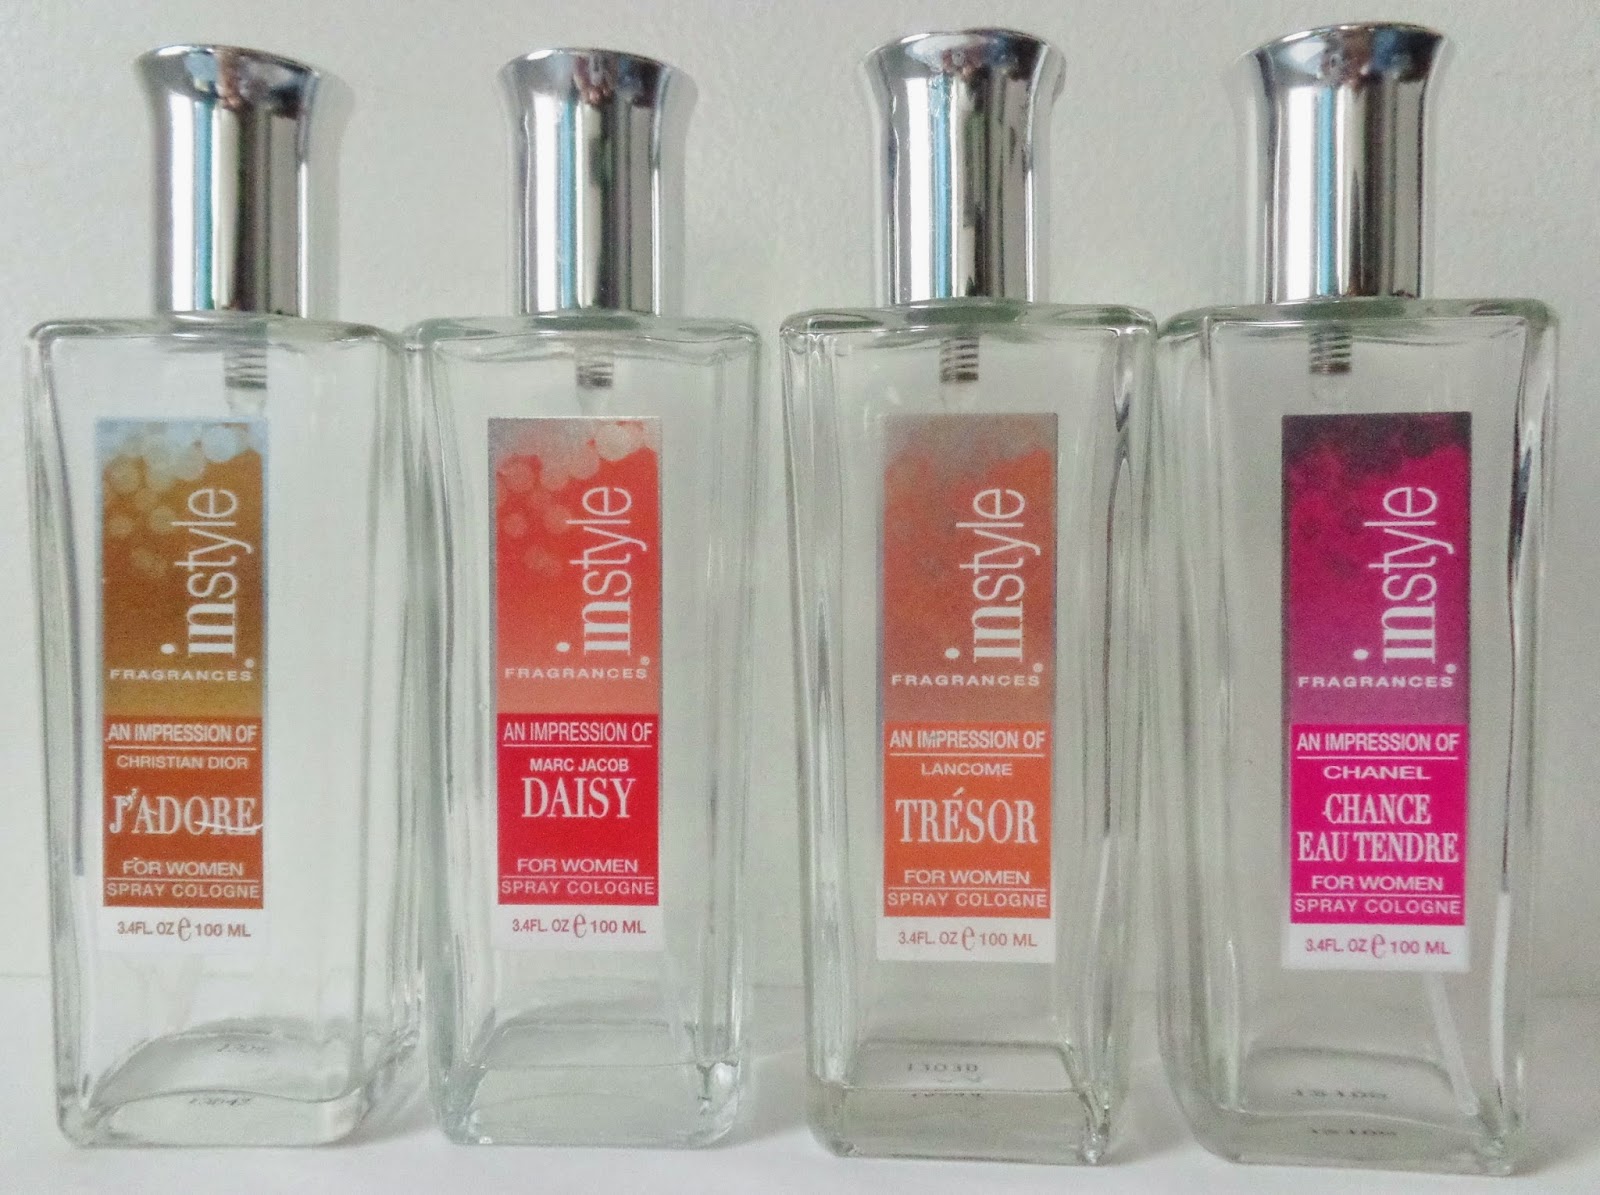 Beauty Entertained: InStyle Fragrances @ Walgreens